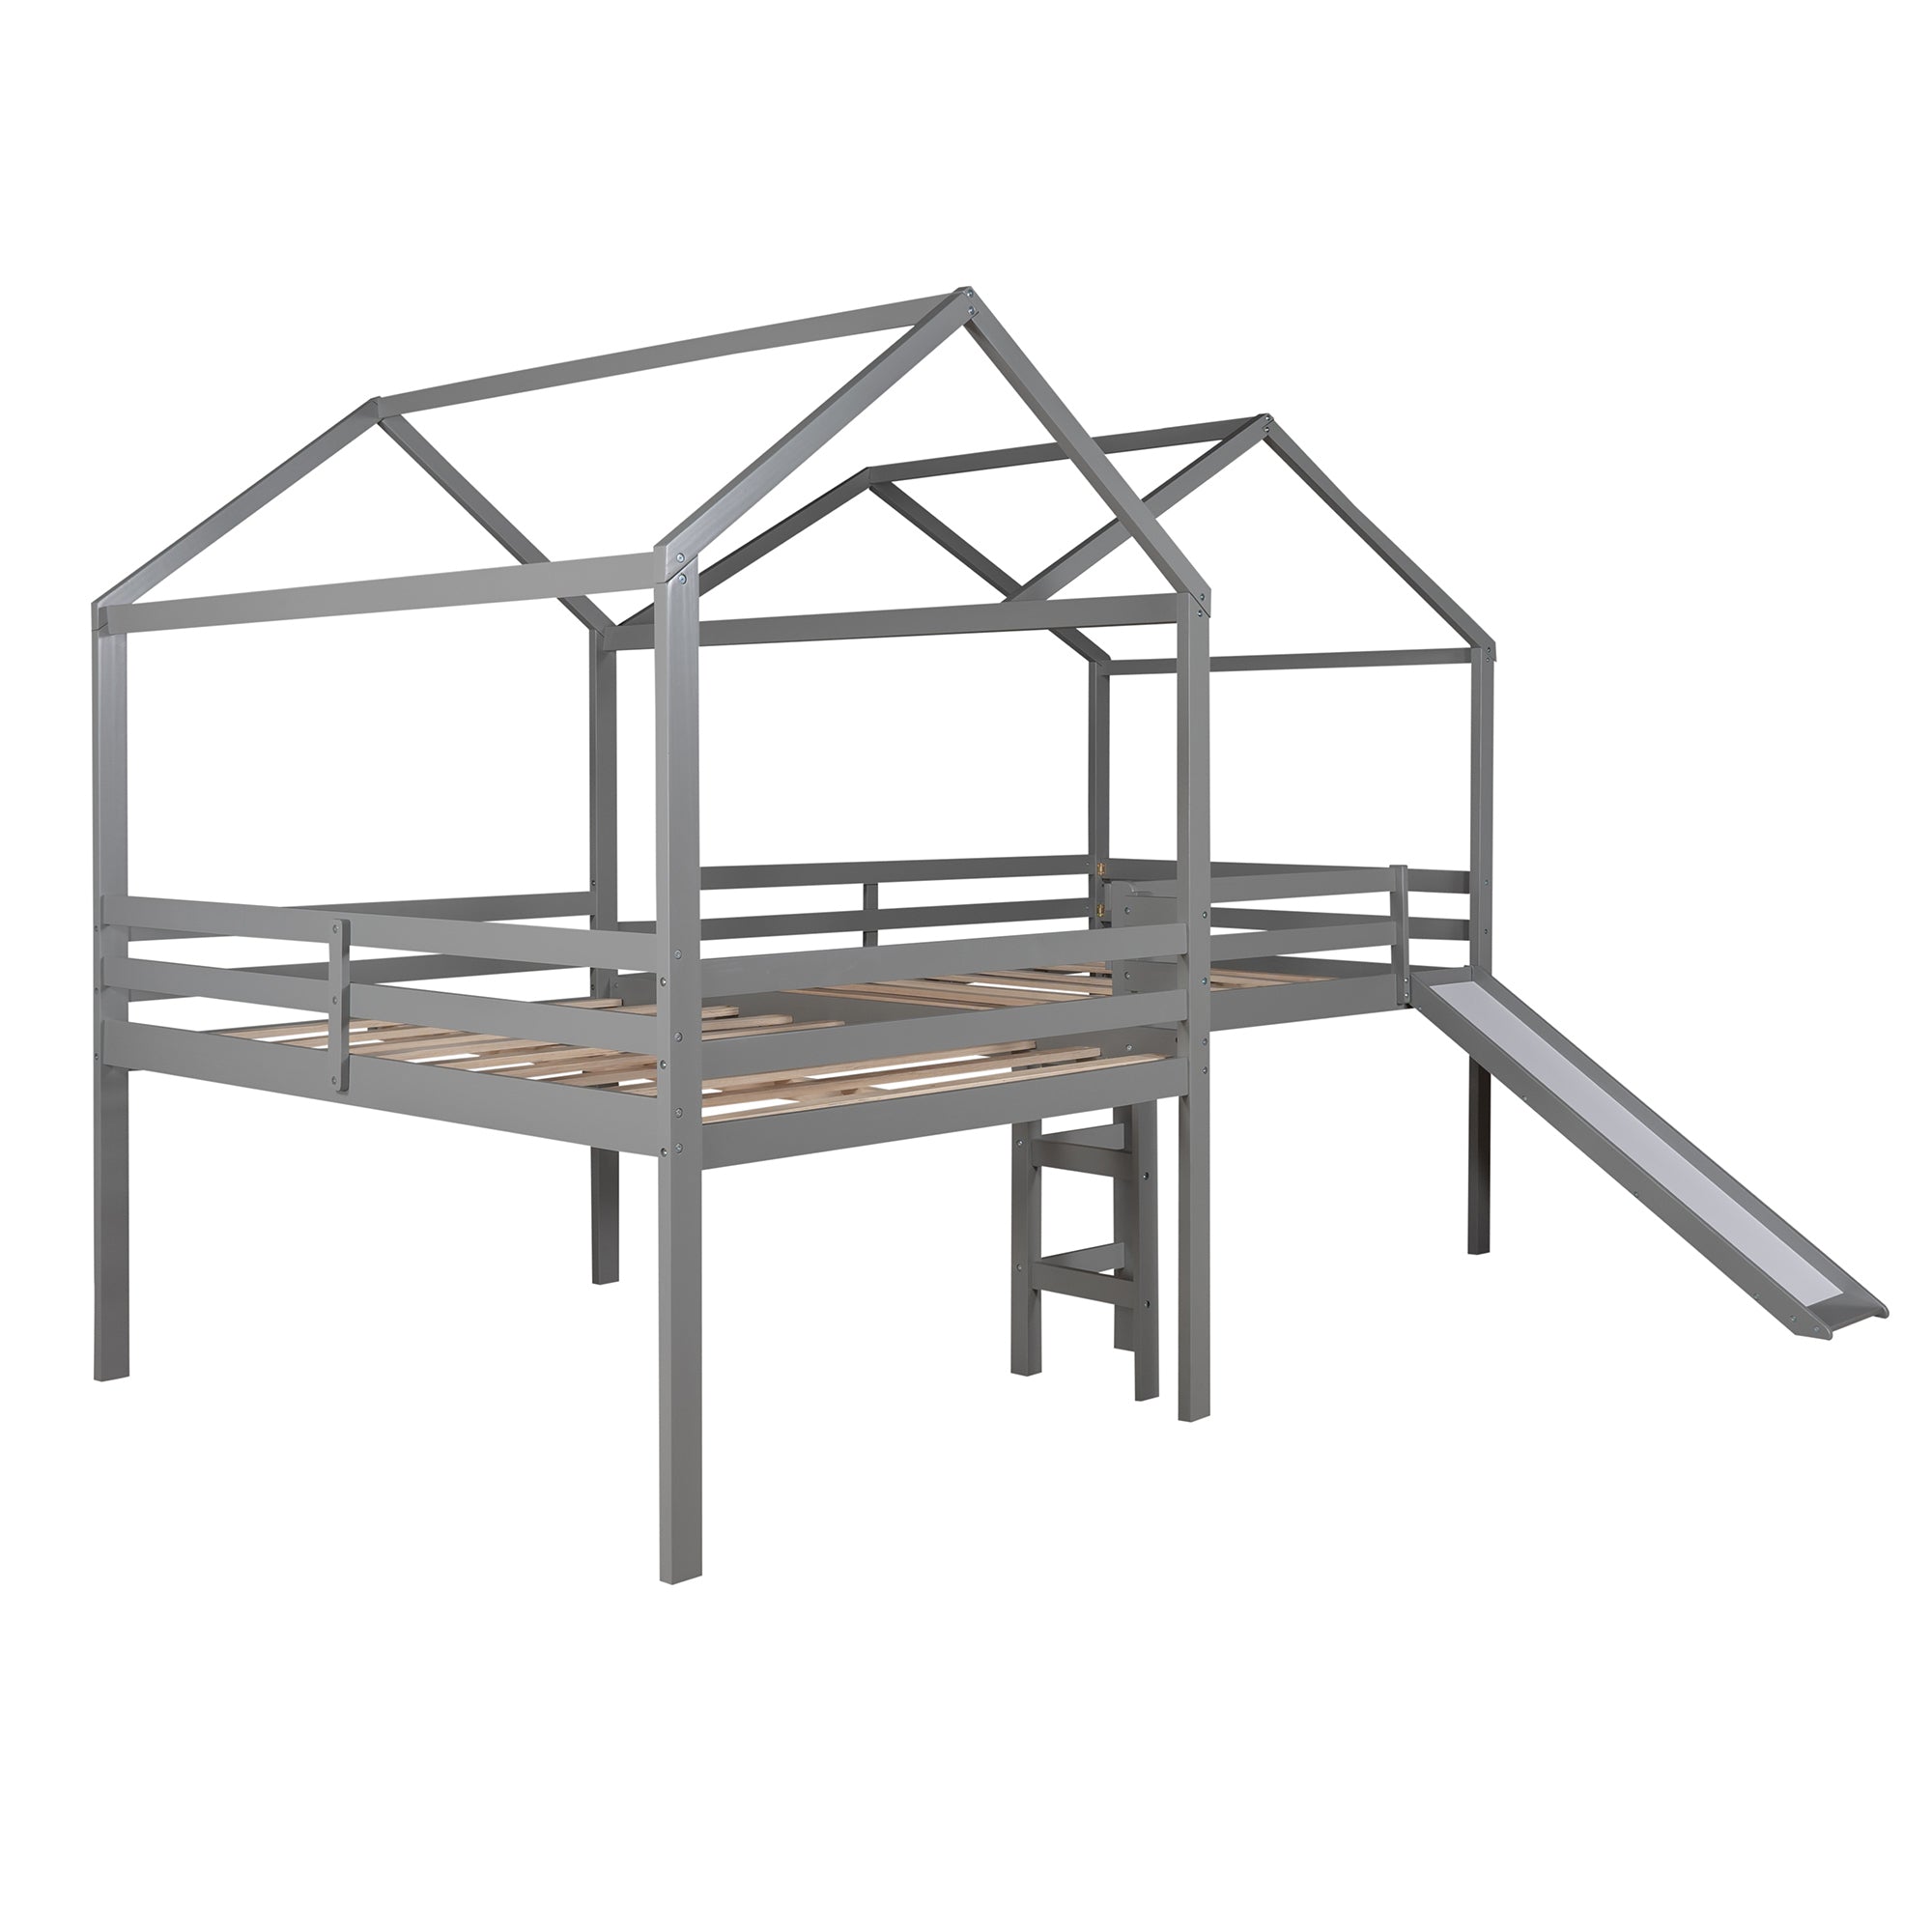 Full size Loft Bed Wood Bed with Roof (Gray)